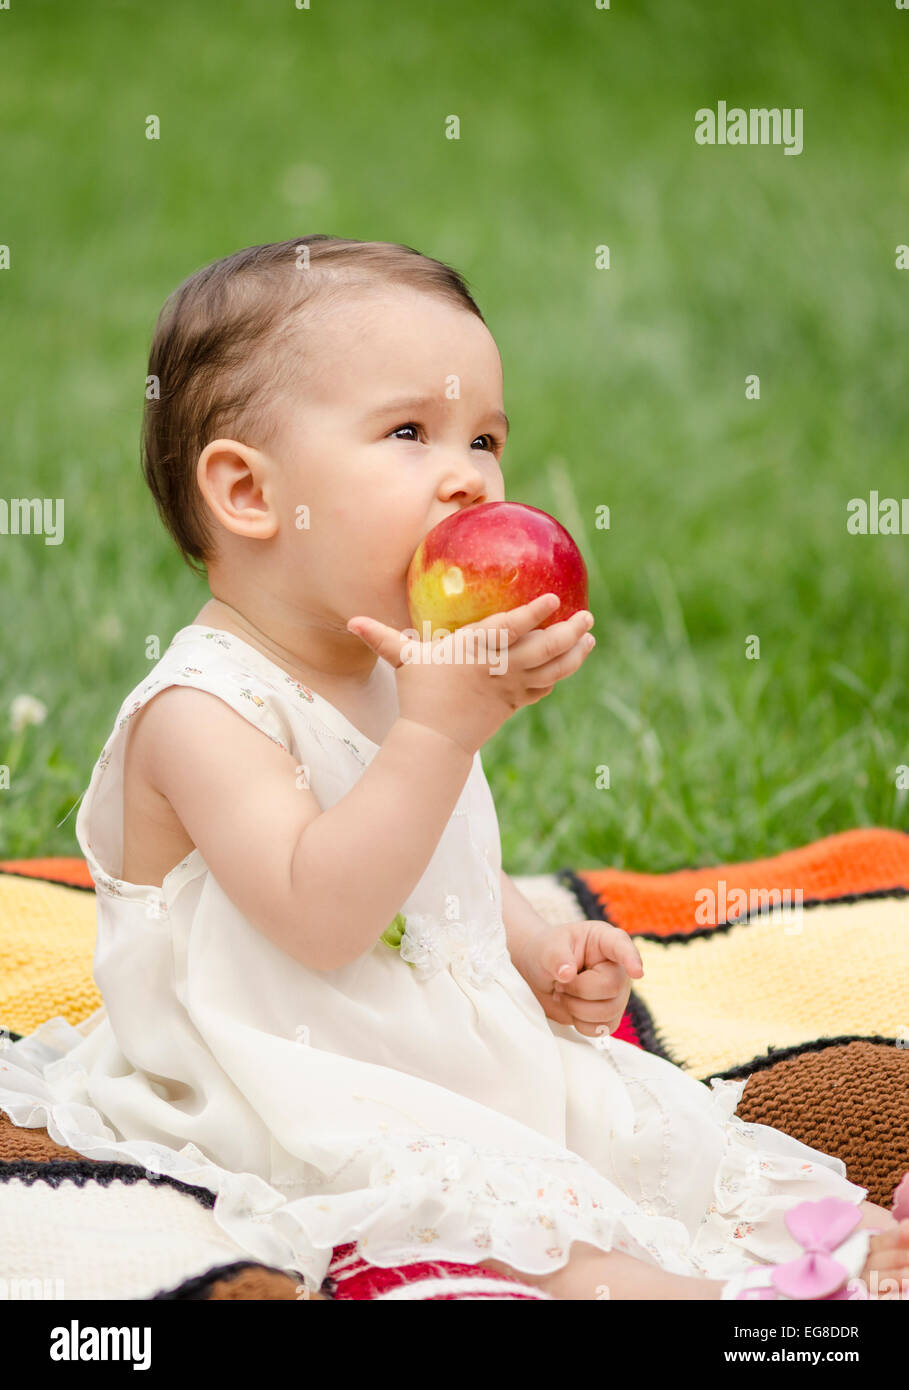 Cute little girl eating a red apple Stock Photo